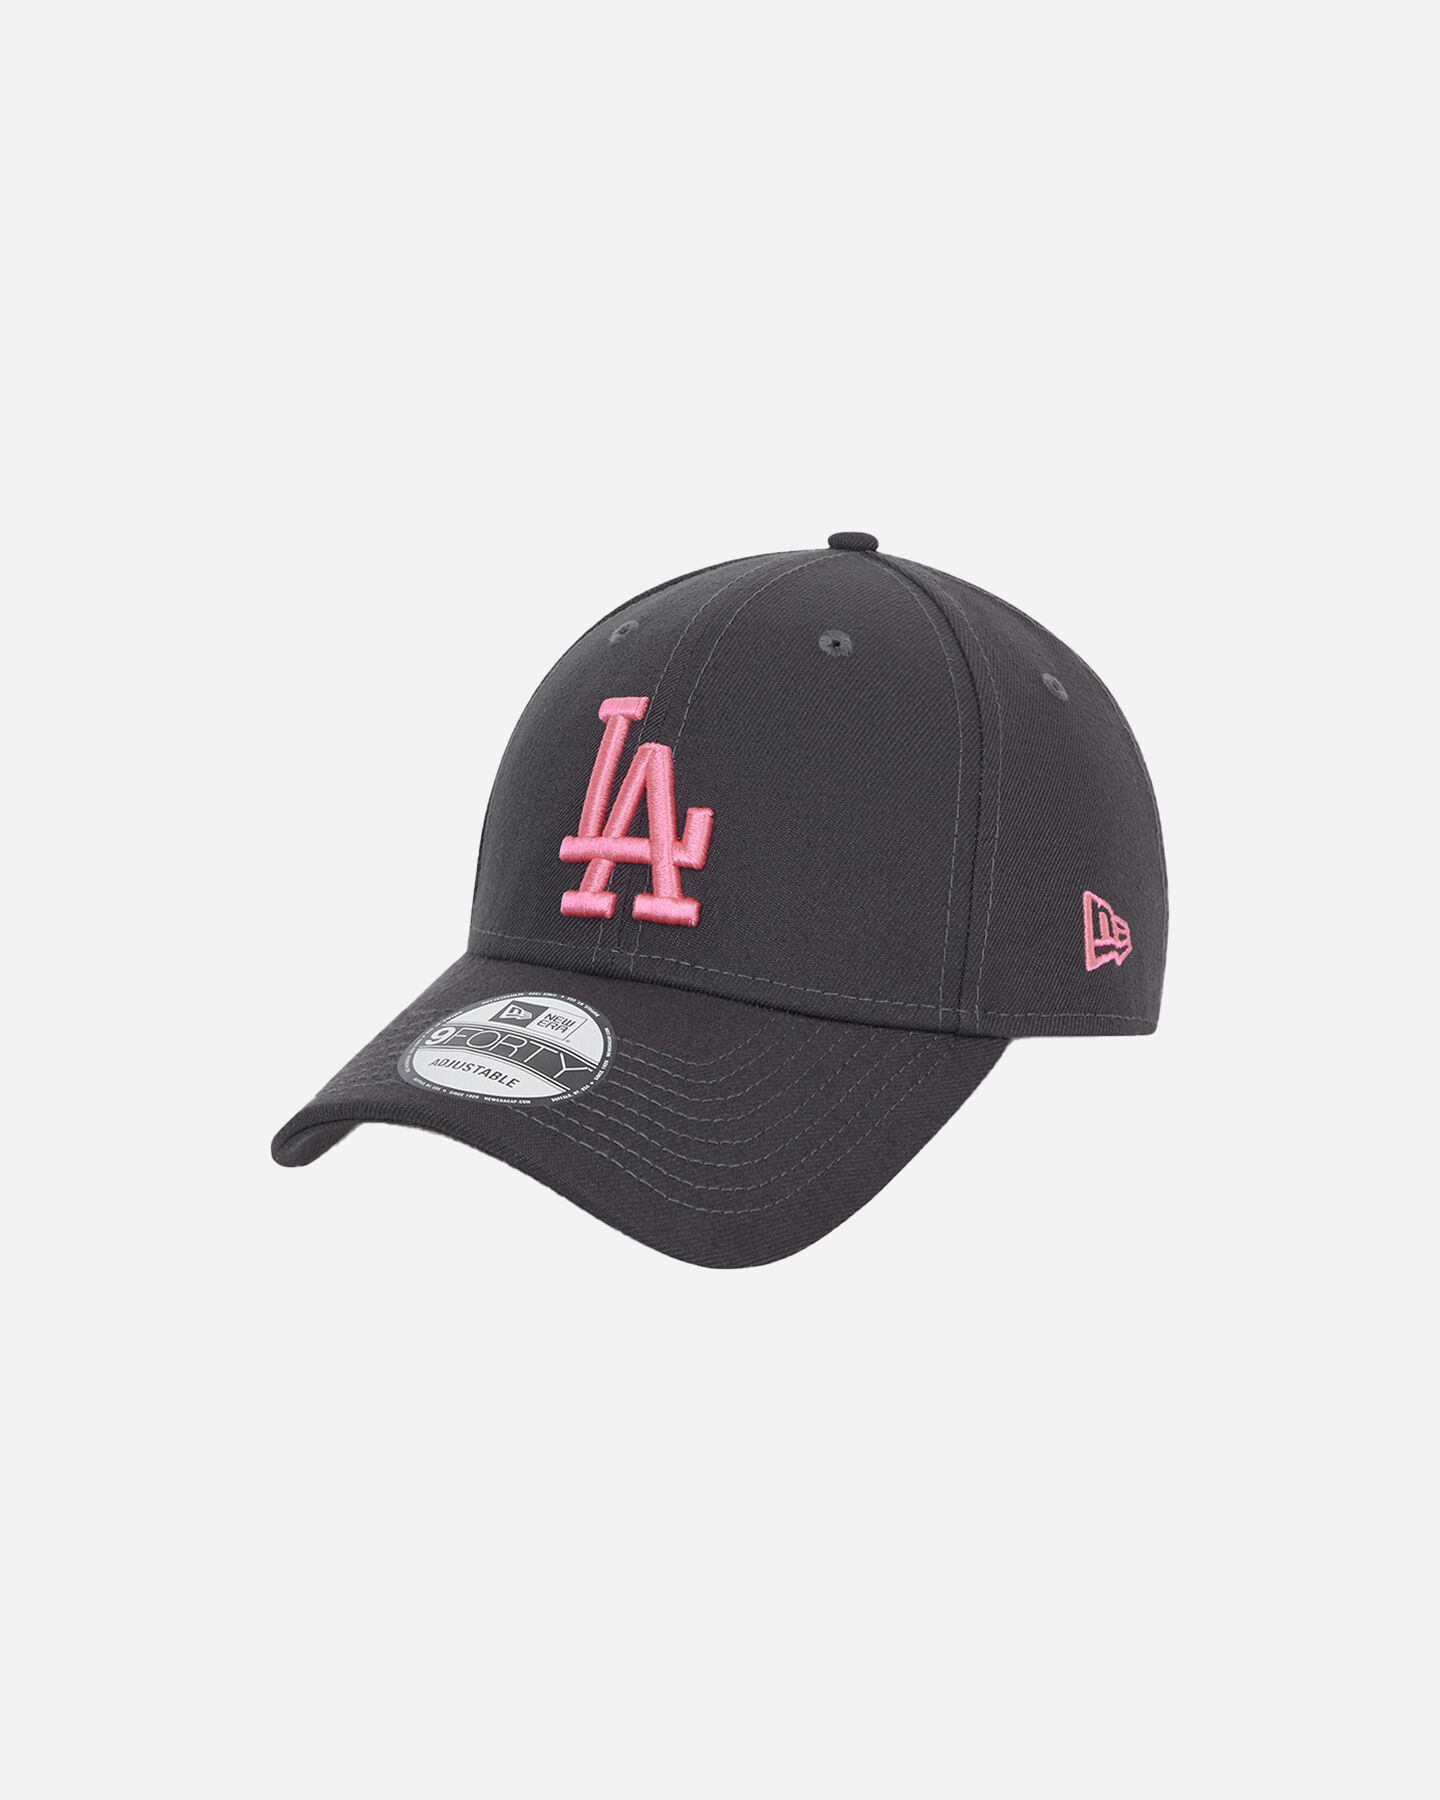  Cappellino NEW ERA 9FORTY LOS ANGELES DODGERS S5313905|021|OSFM scatto 0